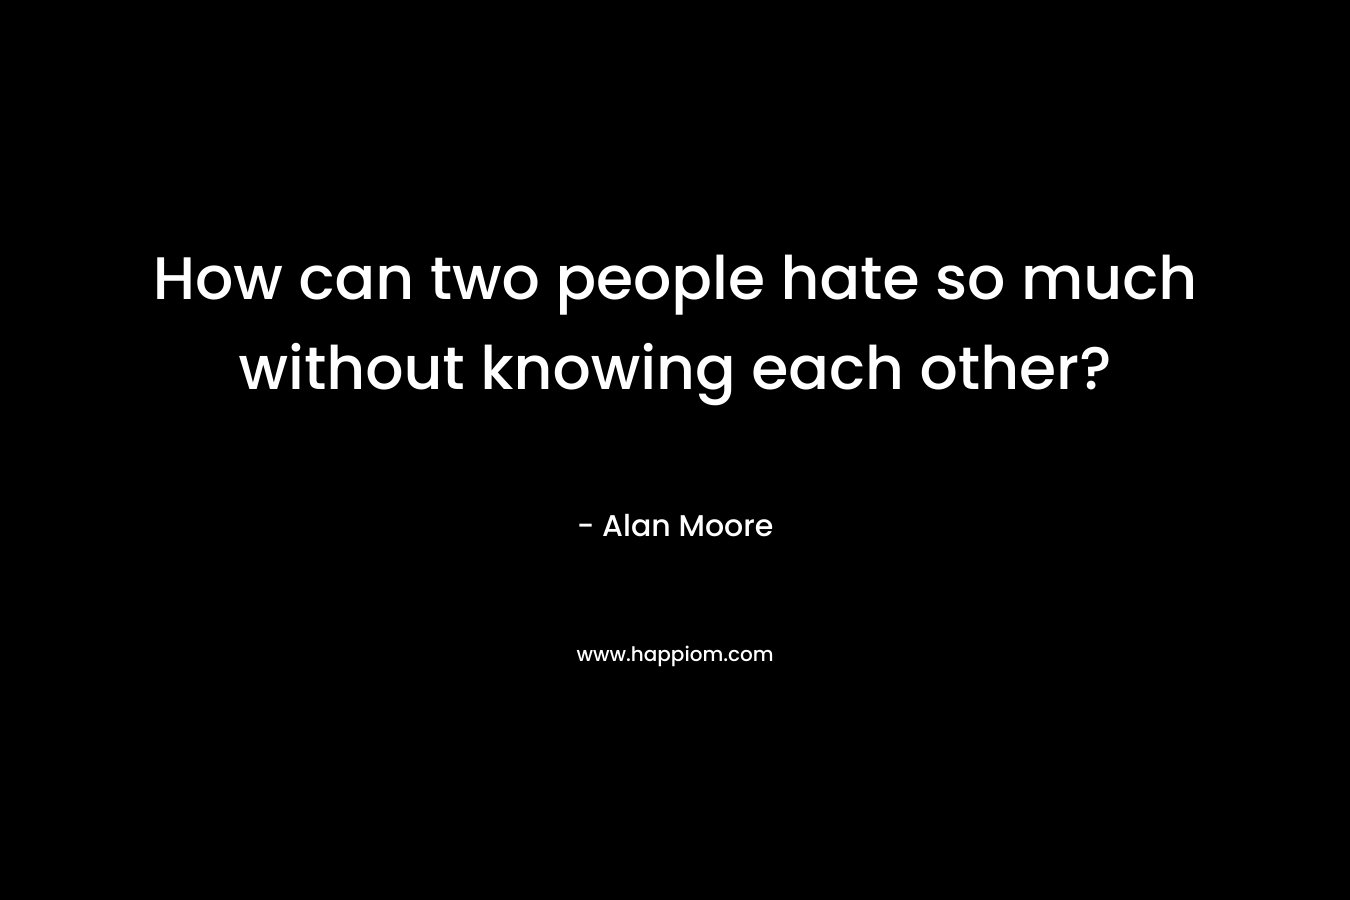 How can two people hate so much without knowing each other?